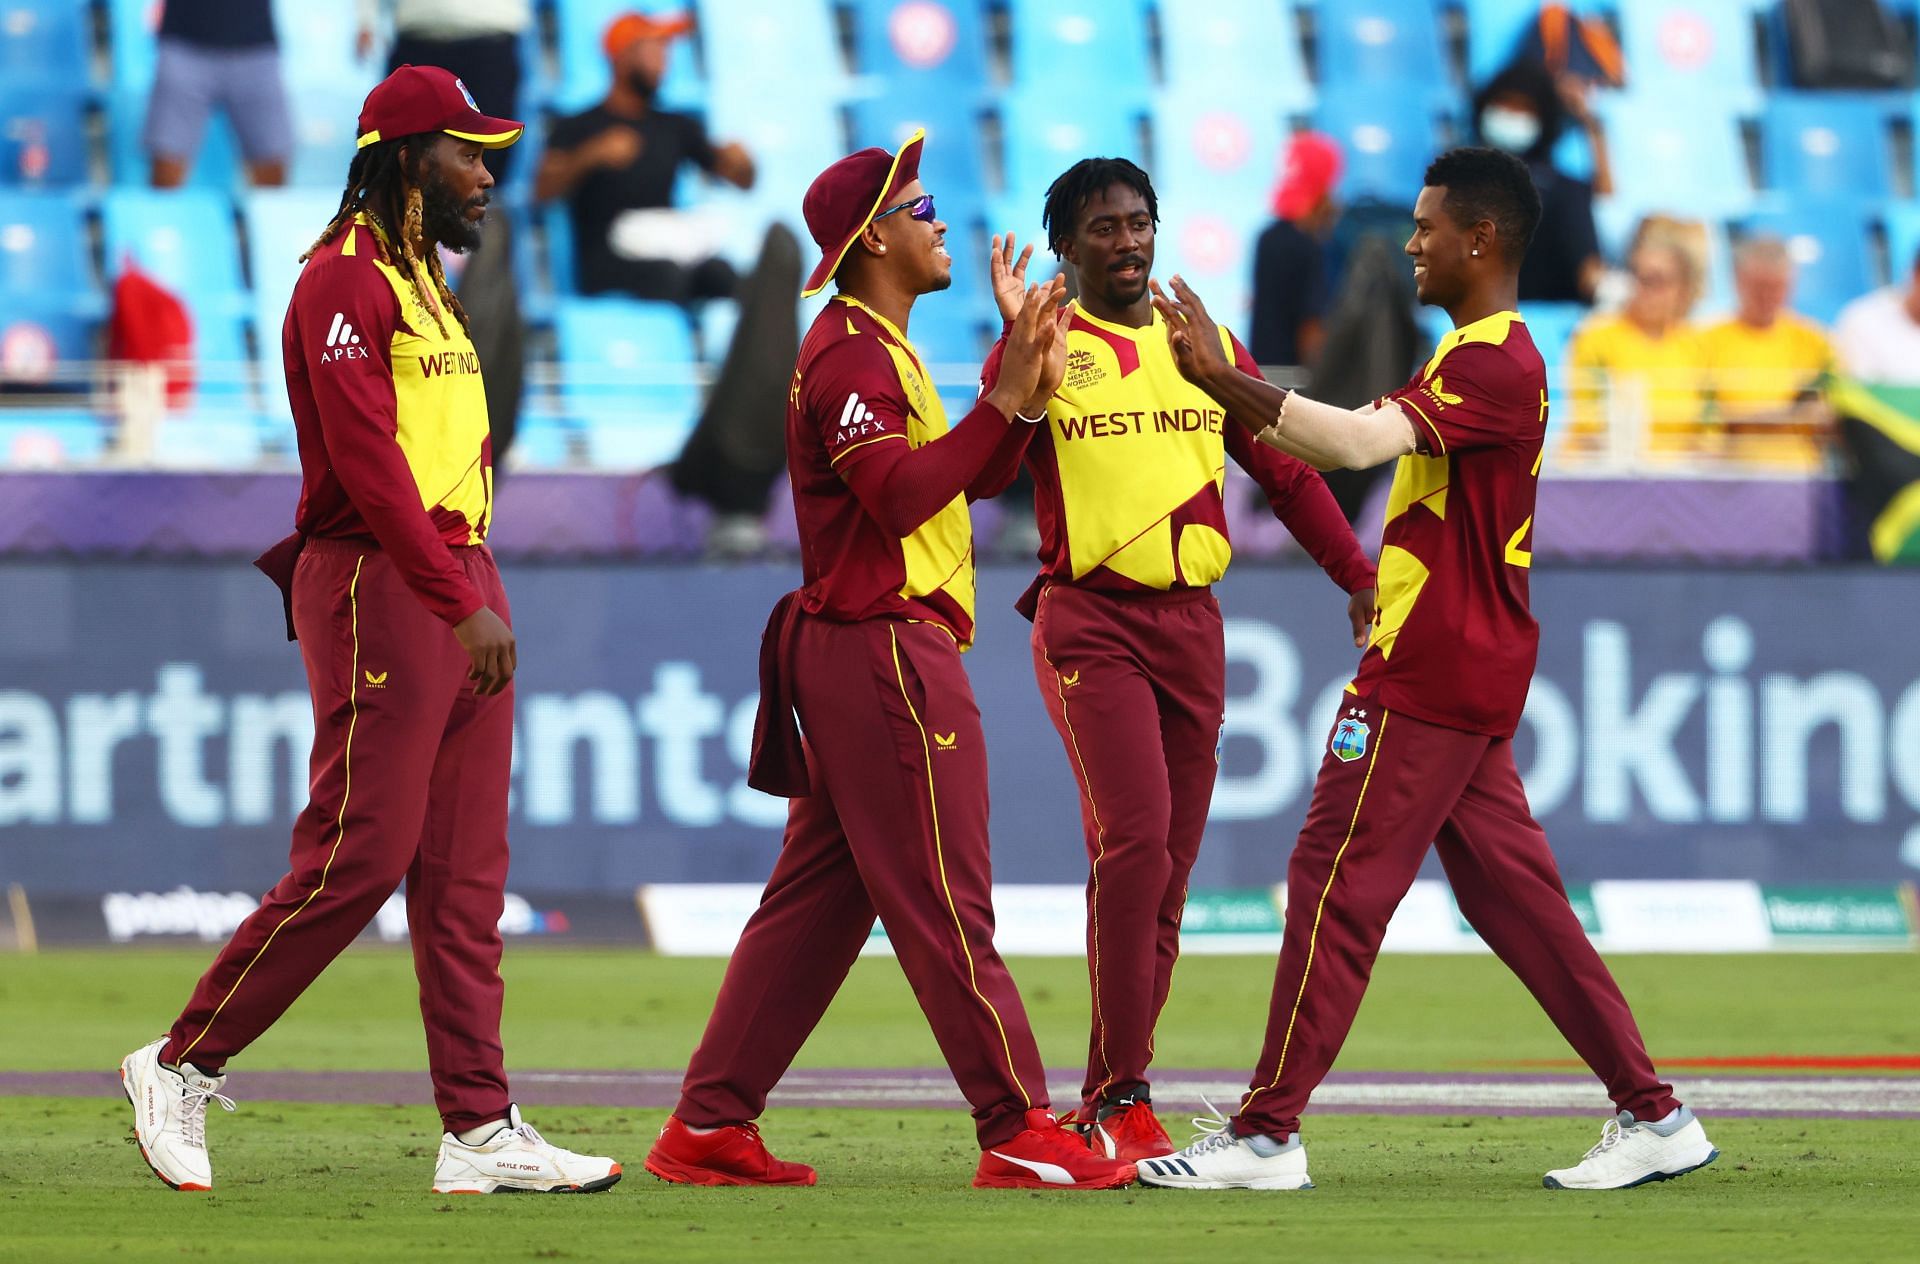 West Indies are on the verge of an early elimination from the ICC T20 World Cup 2021